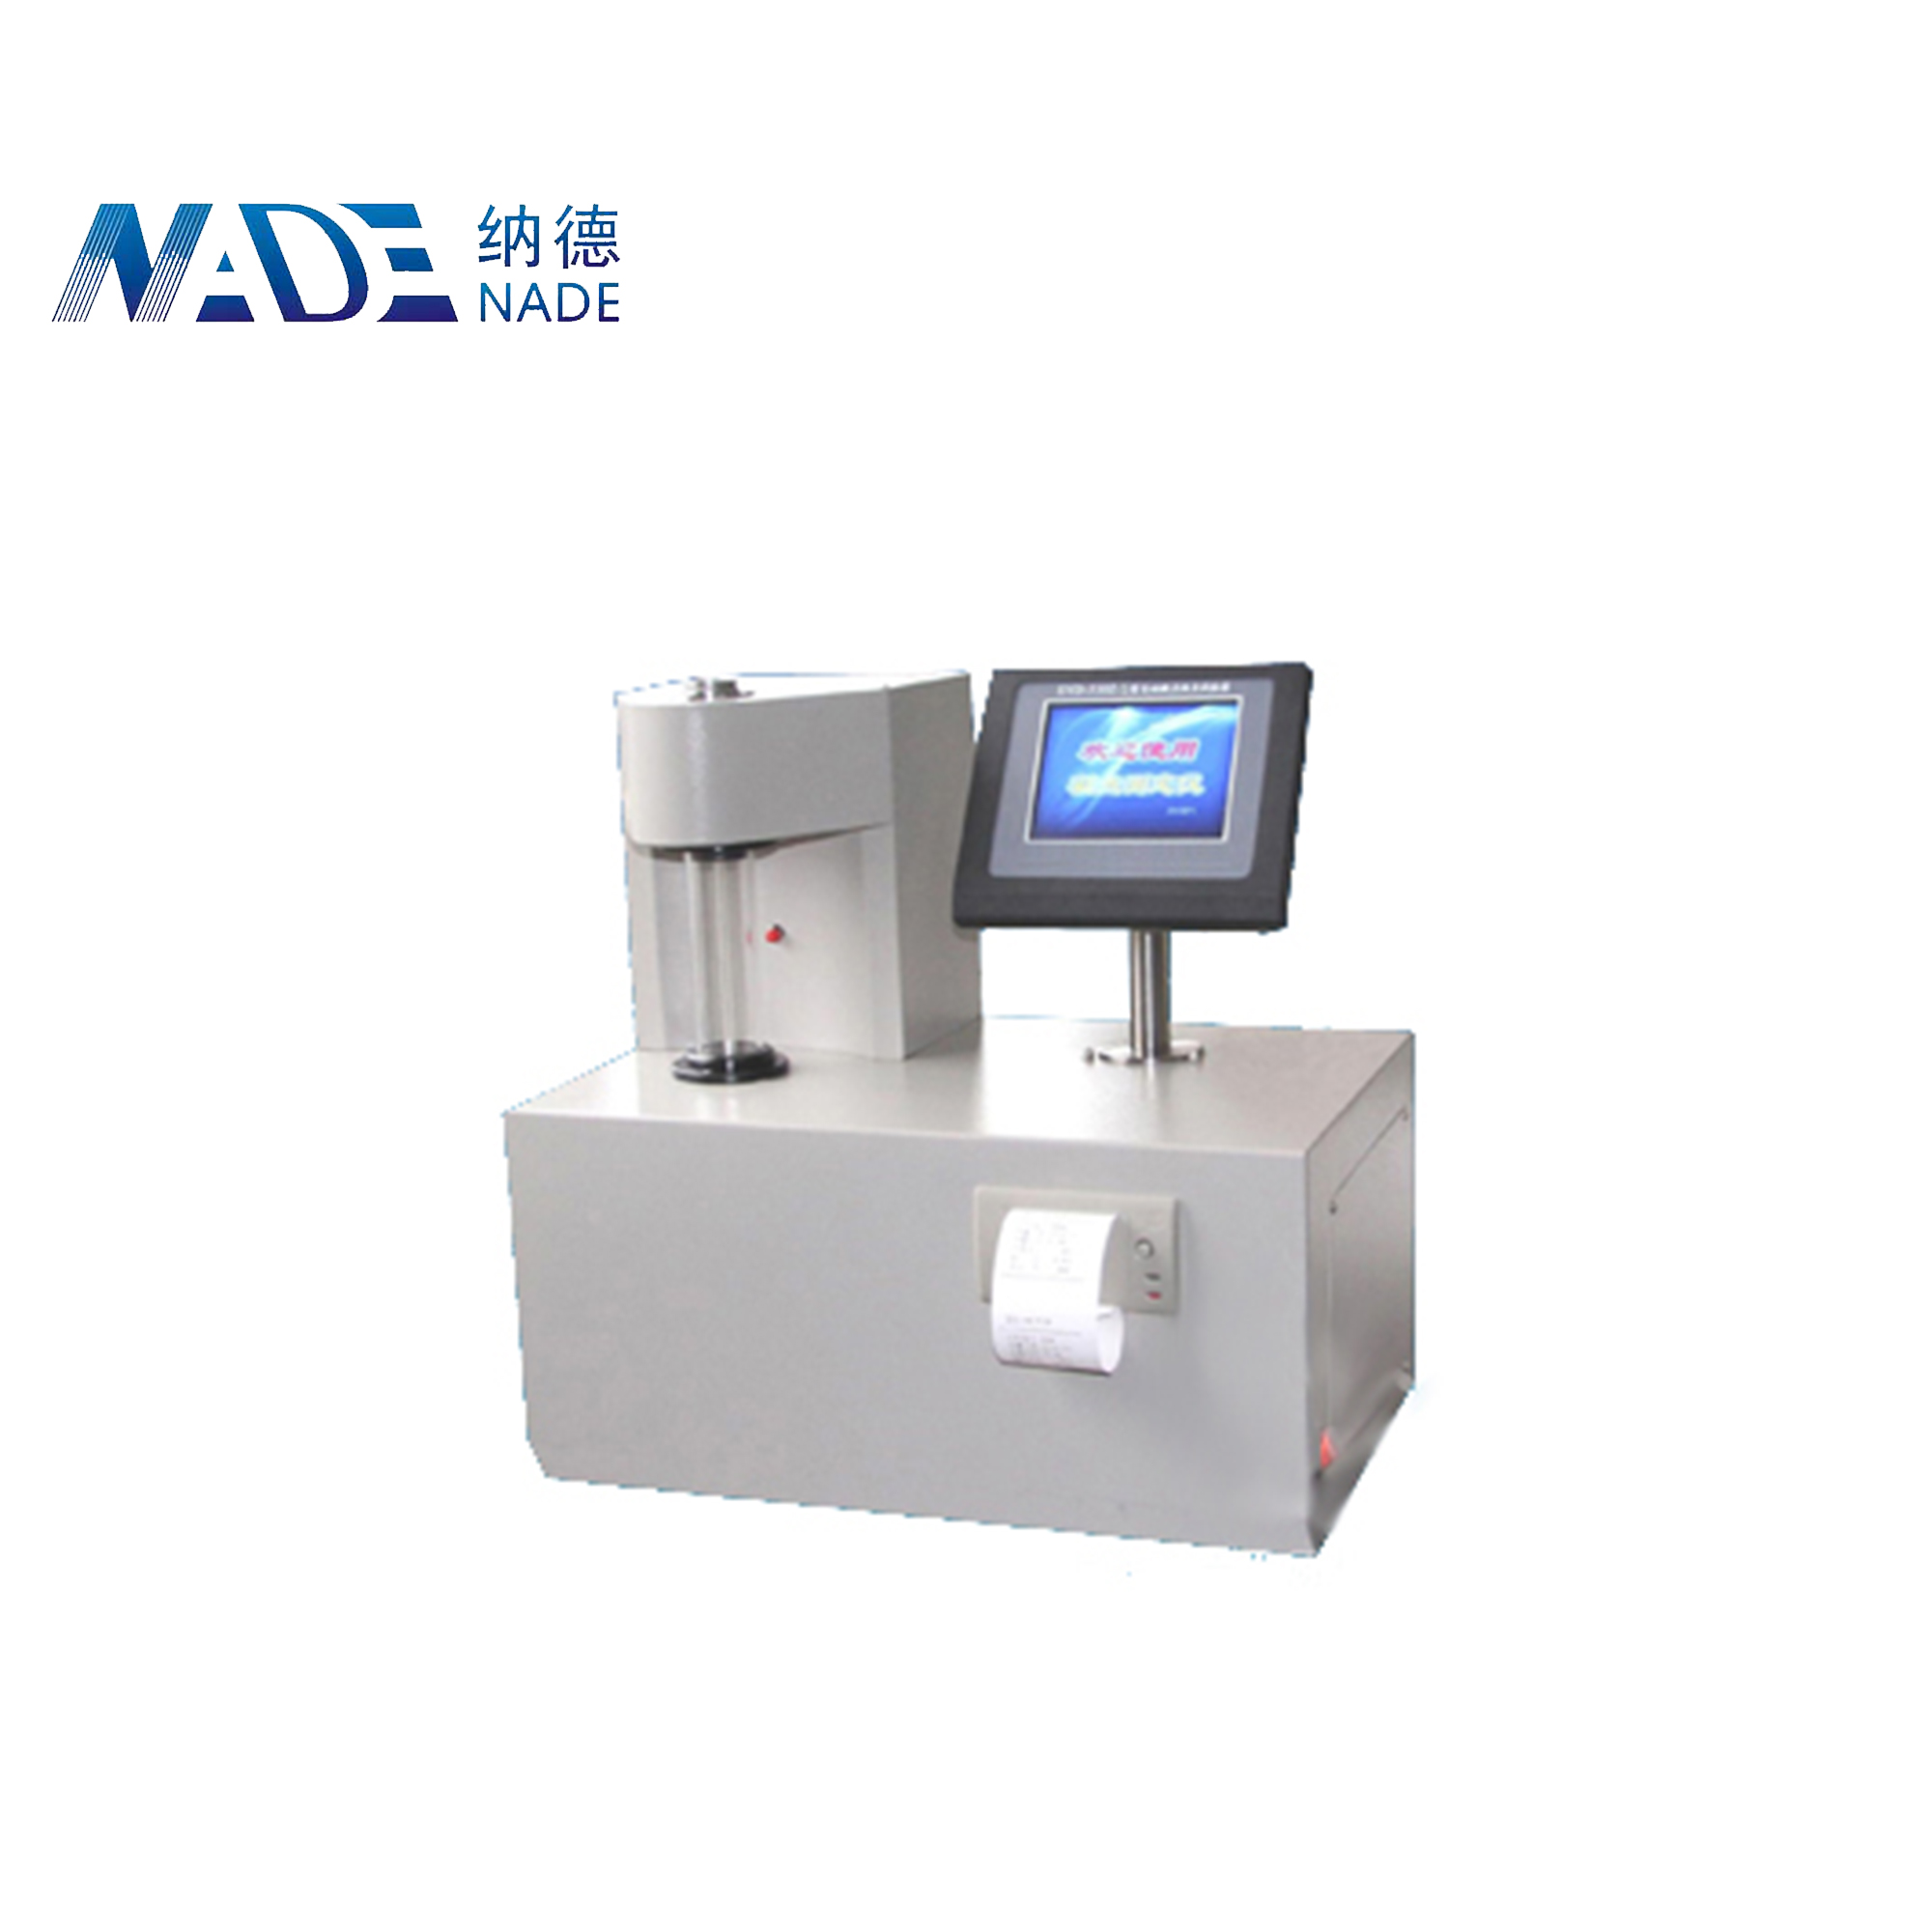 NADE SYD-510Z-1 Laboratory Low Temperature Automatic Solidifying Point and Pour Point Tester of petroleum products